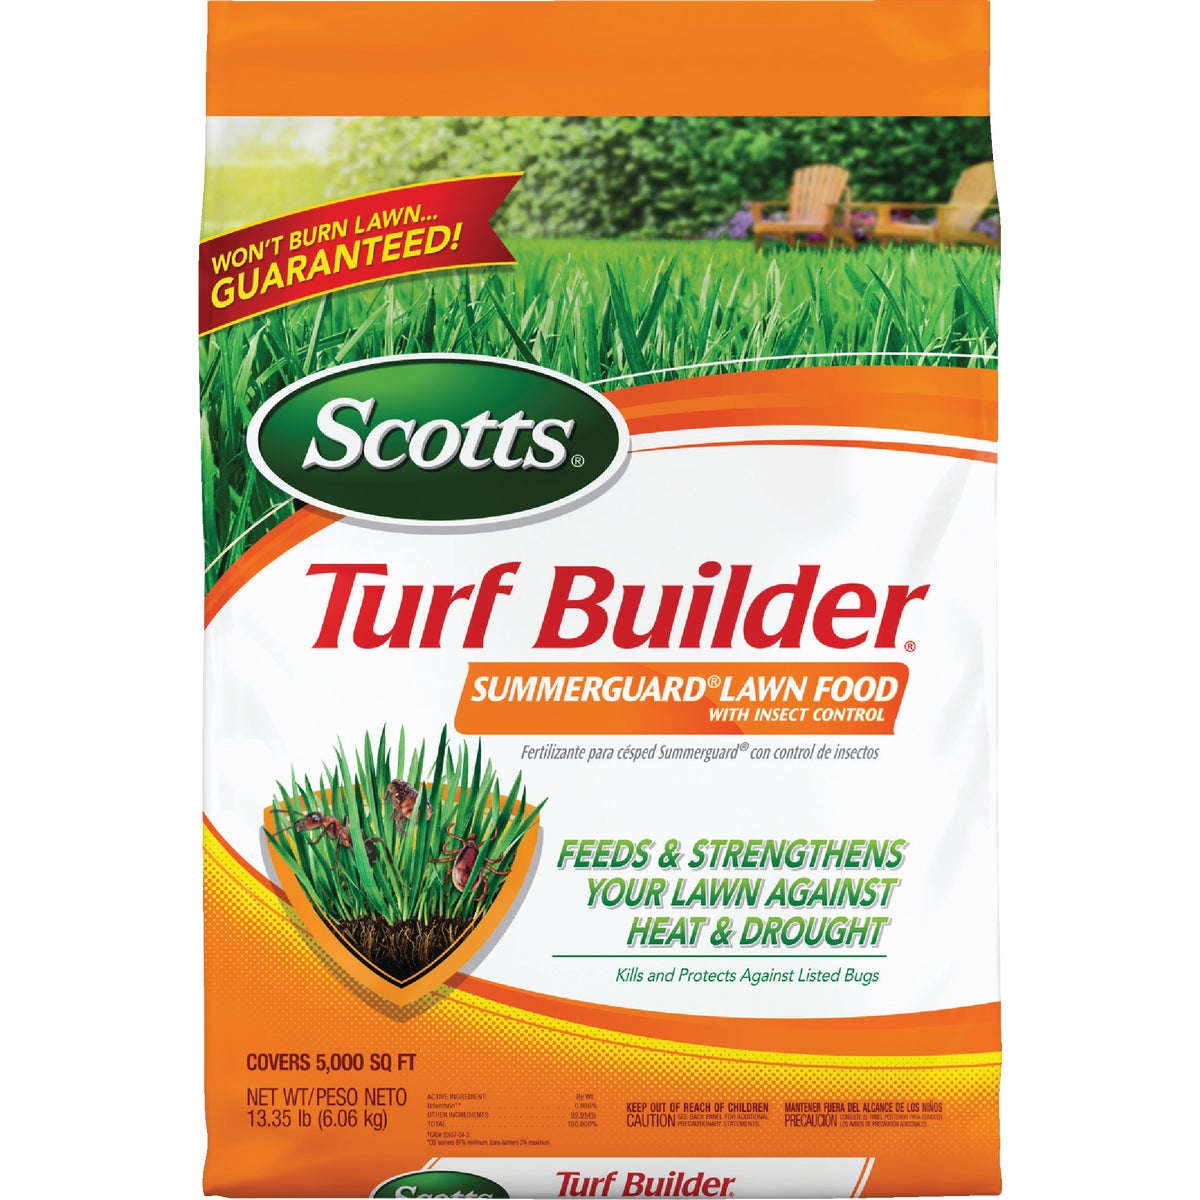 Scotts Turf Builder SummerGuard 13.35 Lb. 5000 Sq. Ft. Lawn Food with Insect Control